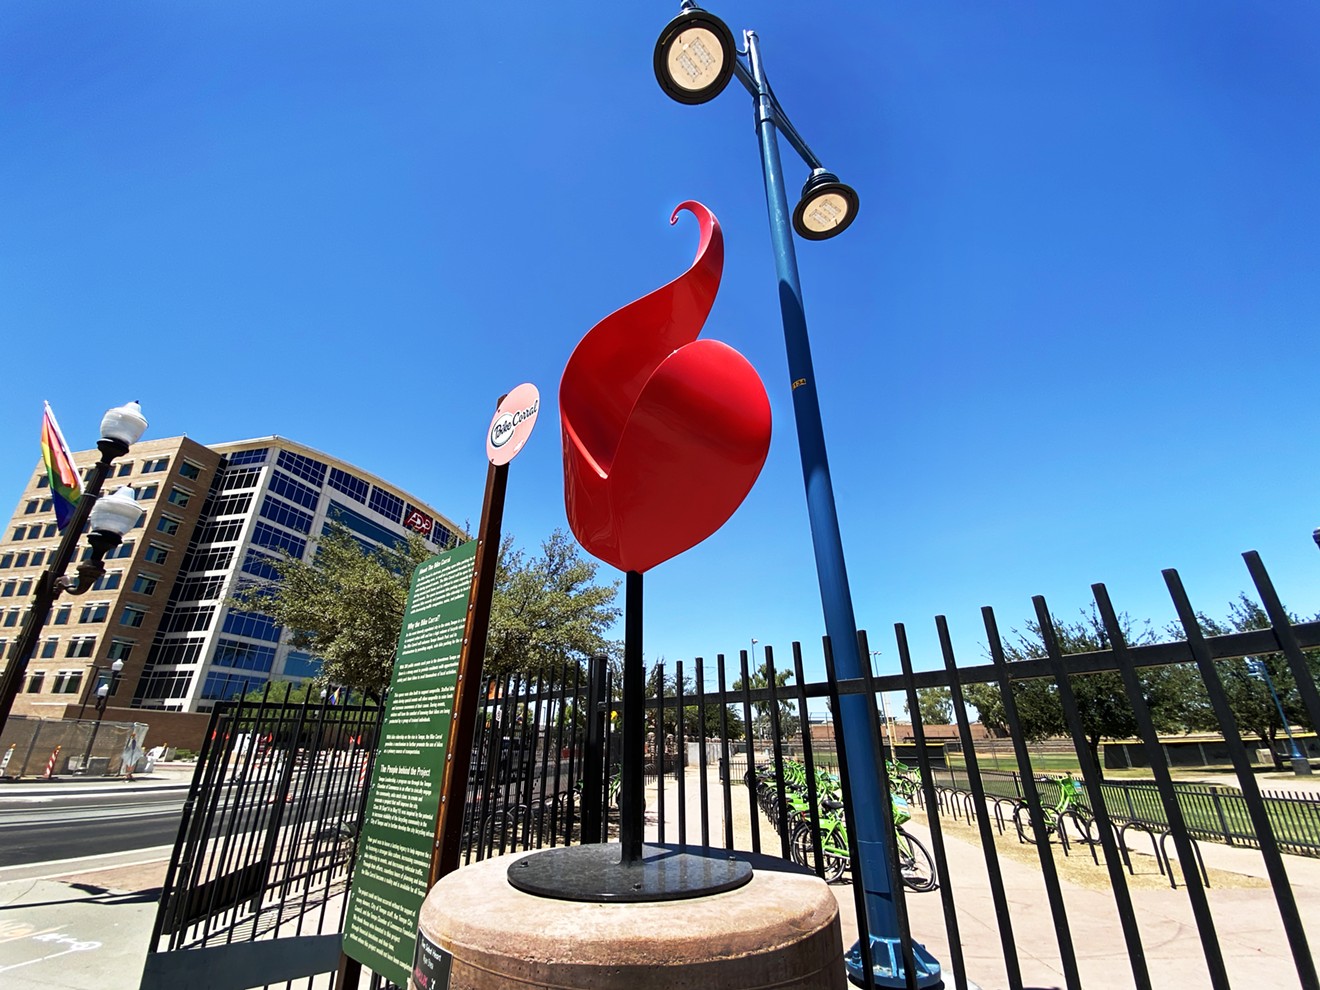 Look for Ryan Shea's Two-Sided Heart at Tempe Beach Park.